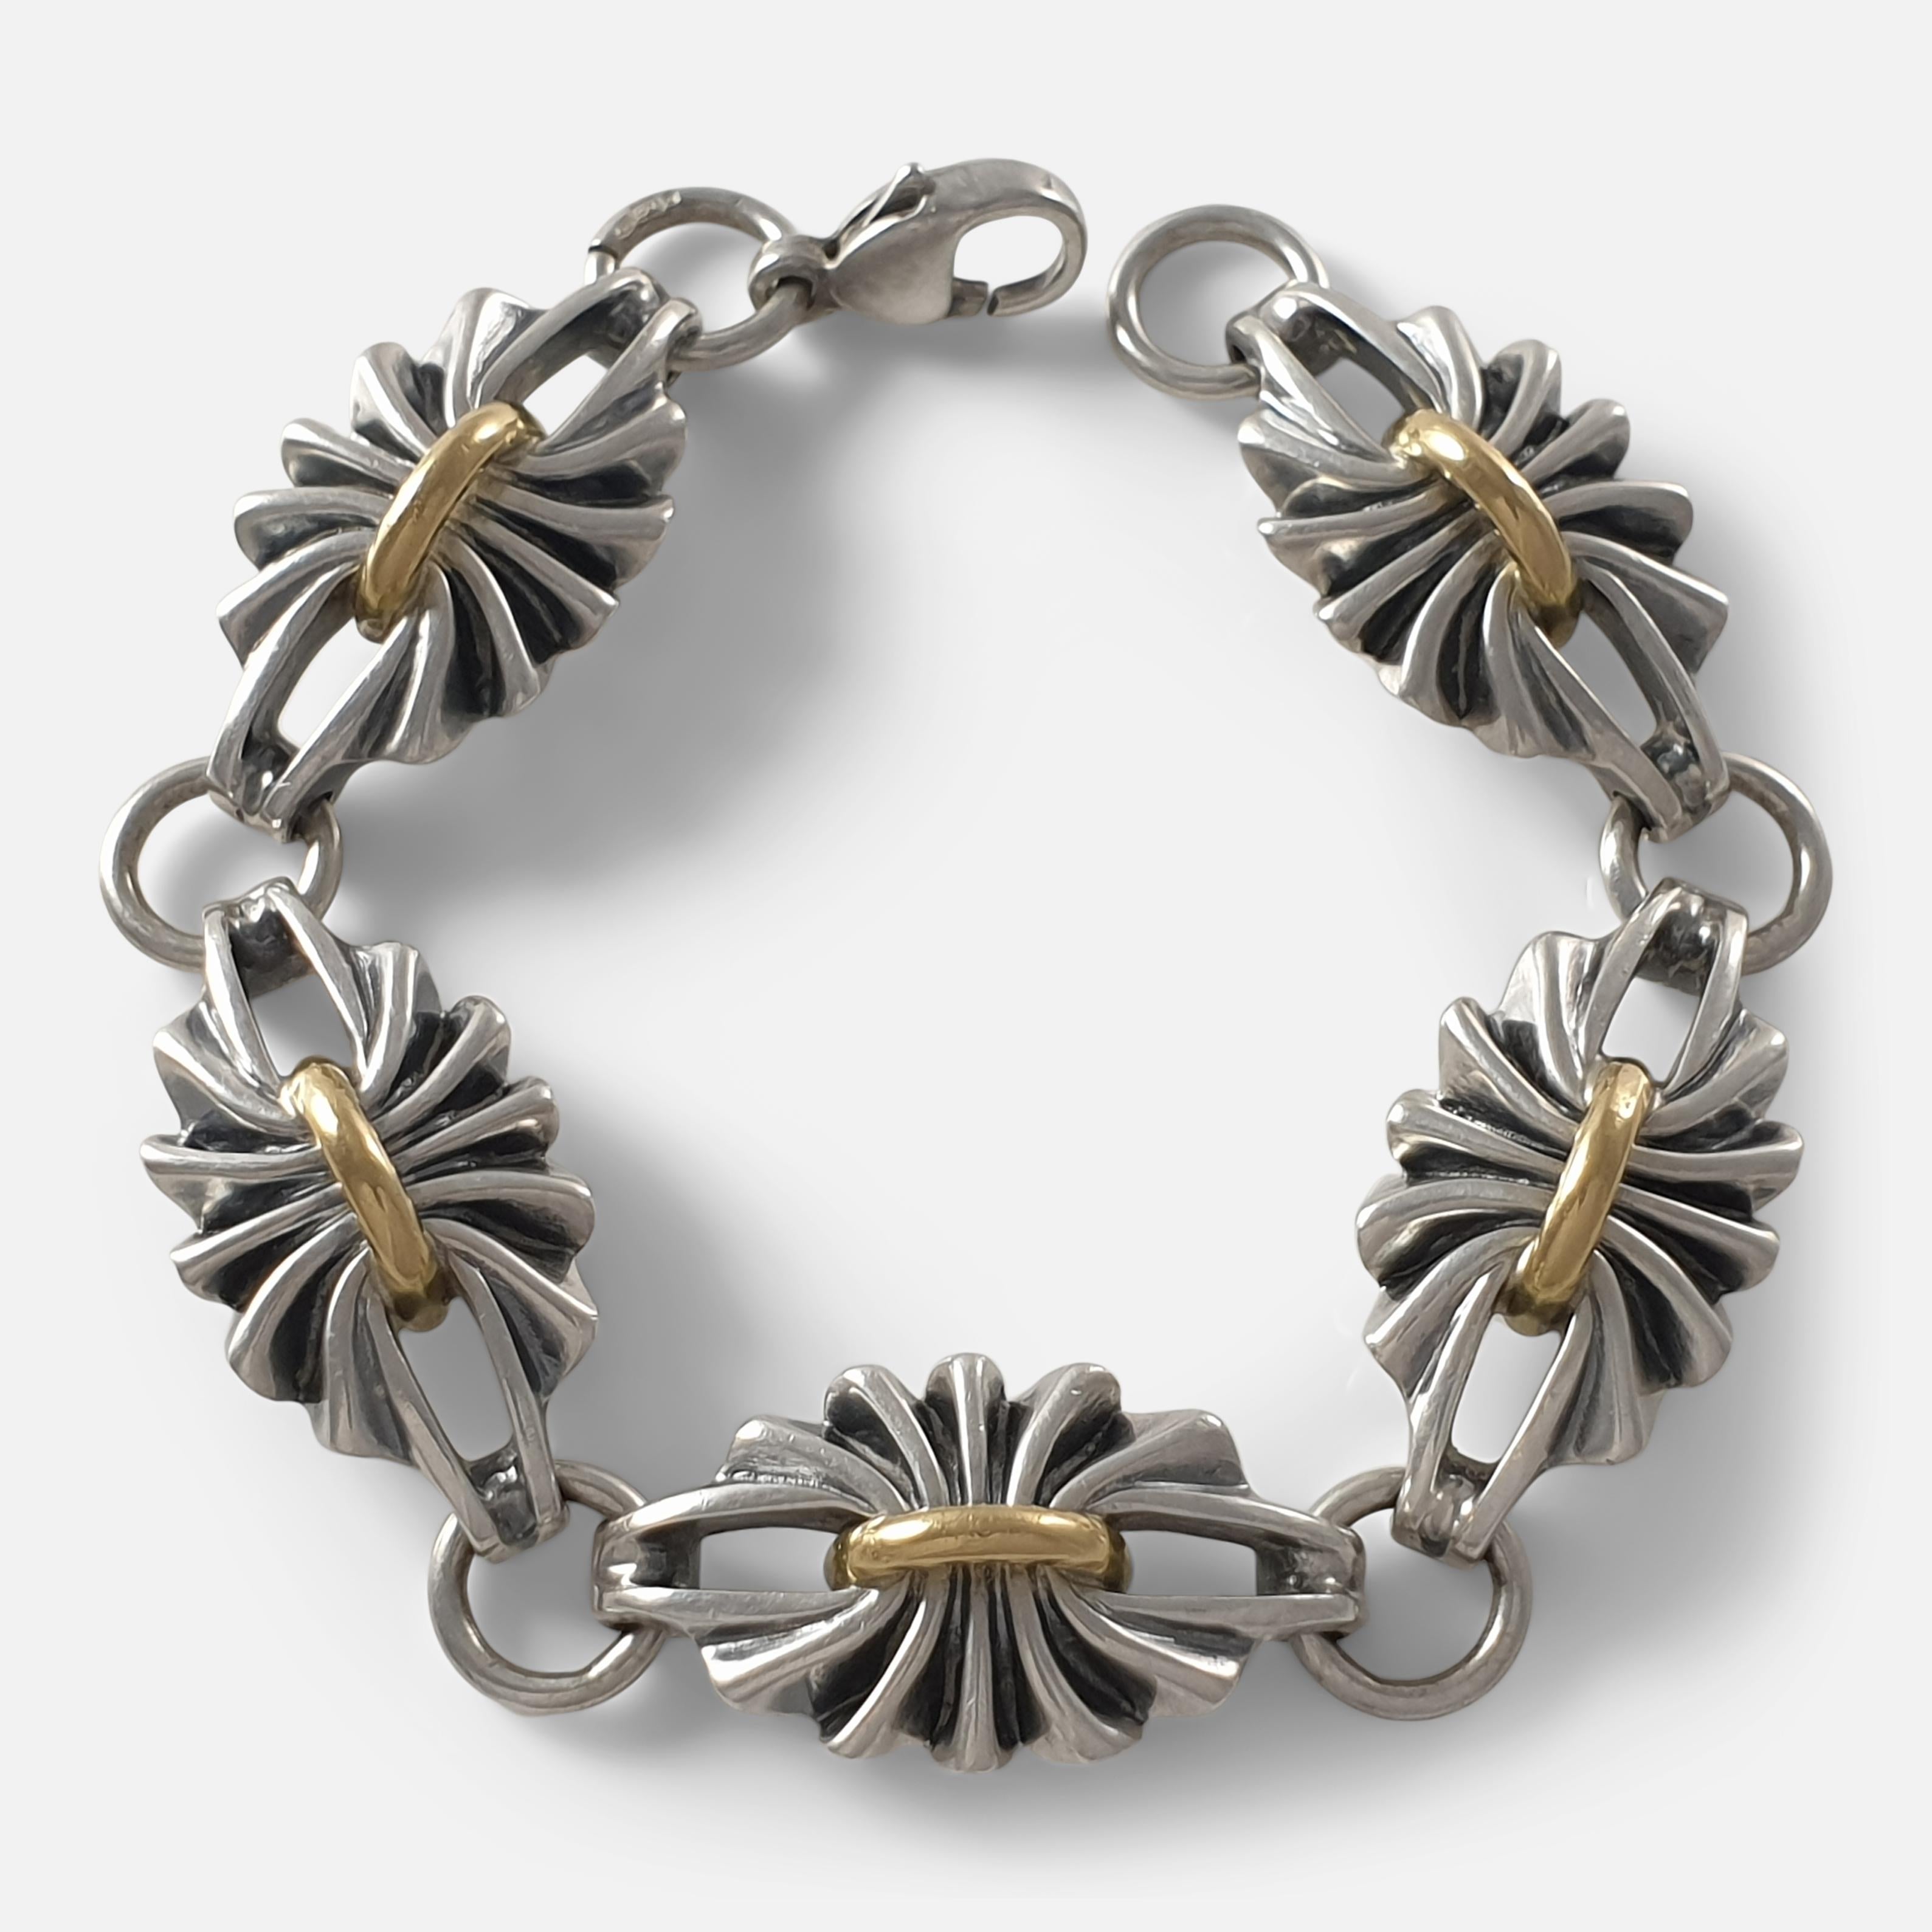 A sterling silver gilt bracelet #394, designed by Lene Munthe for Georg Jensen. 

The bracelet is stamped with the Georg Jensen within a dotted oval marking (used since 1945), 